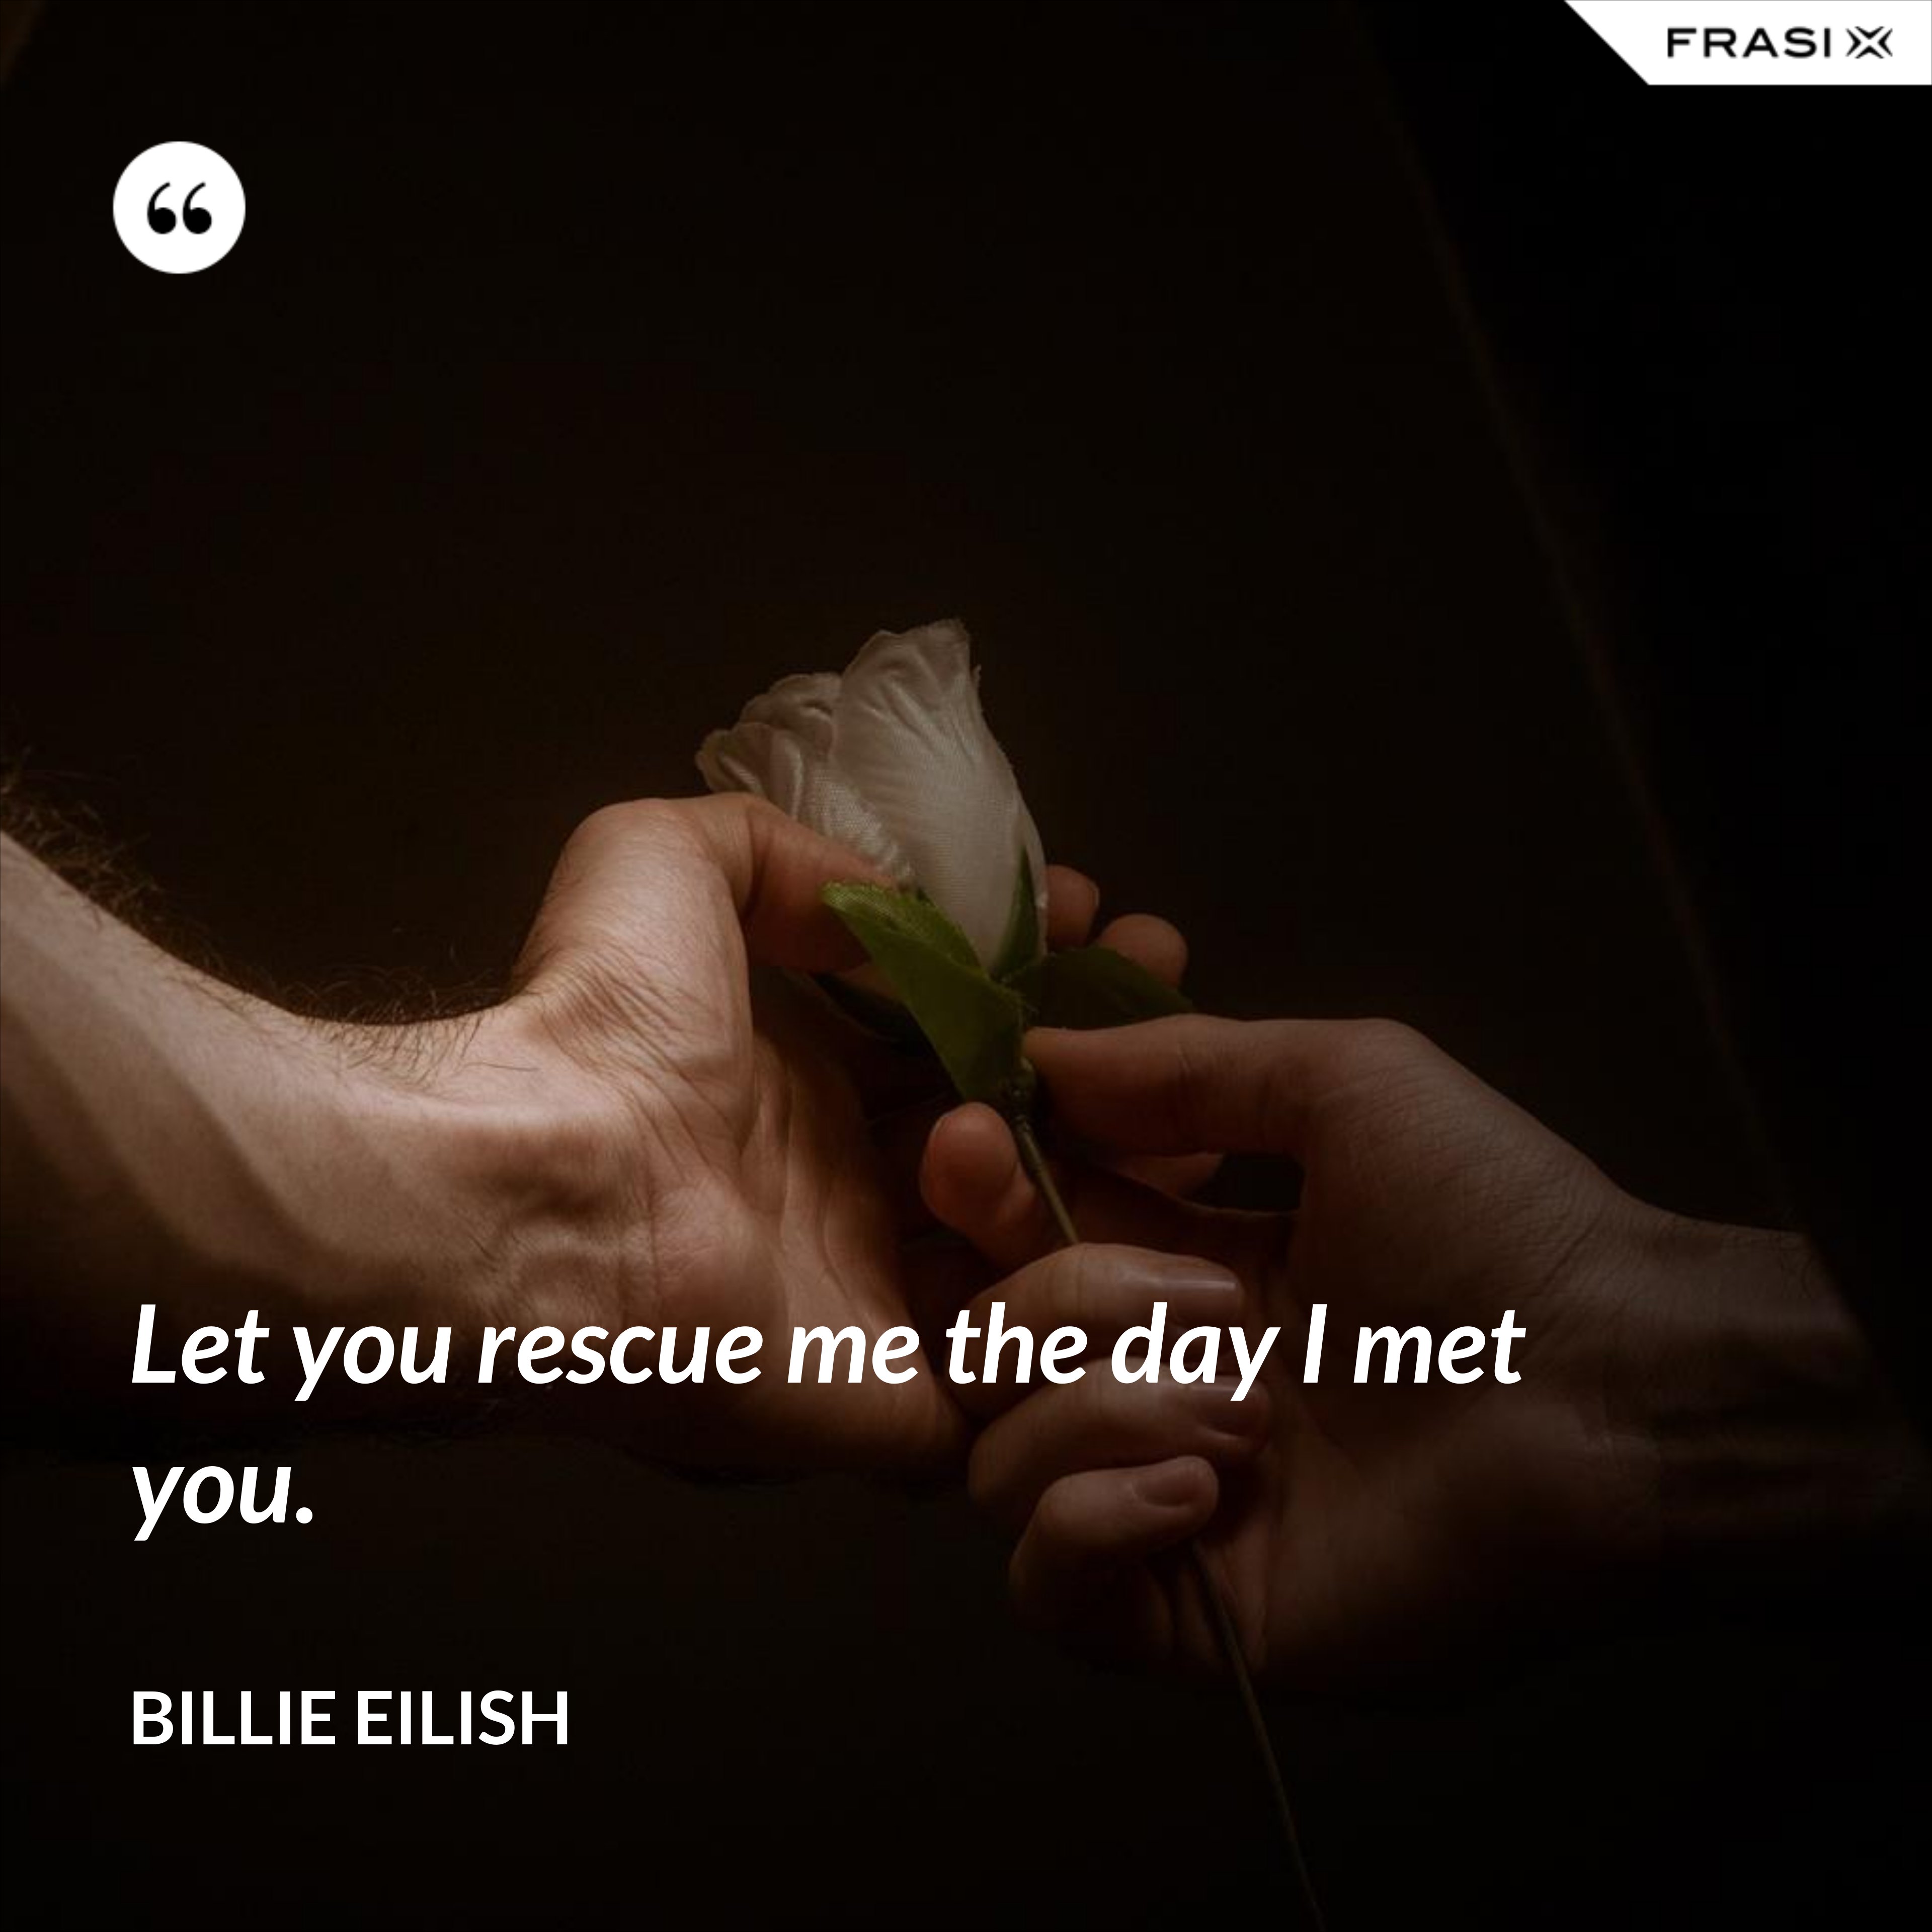 Let you rescue me the day I met you. - Billie Eilish